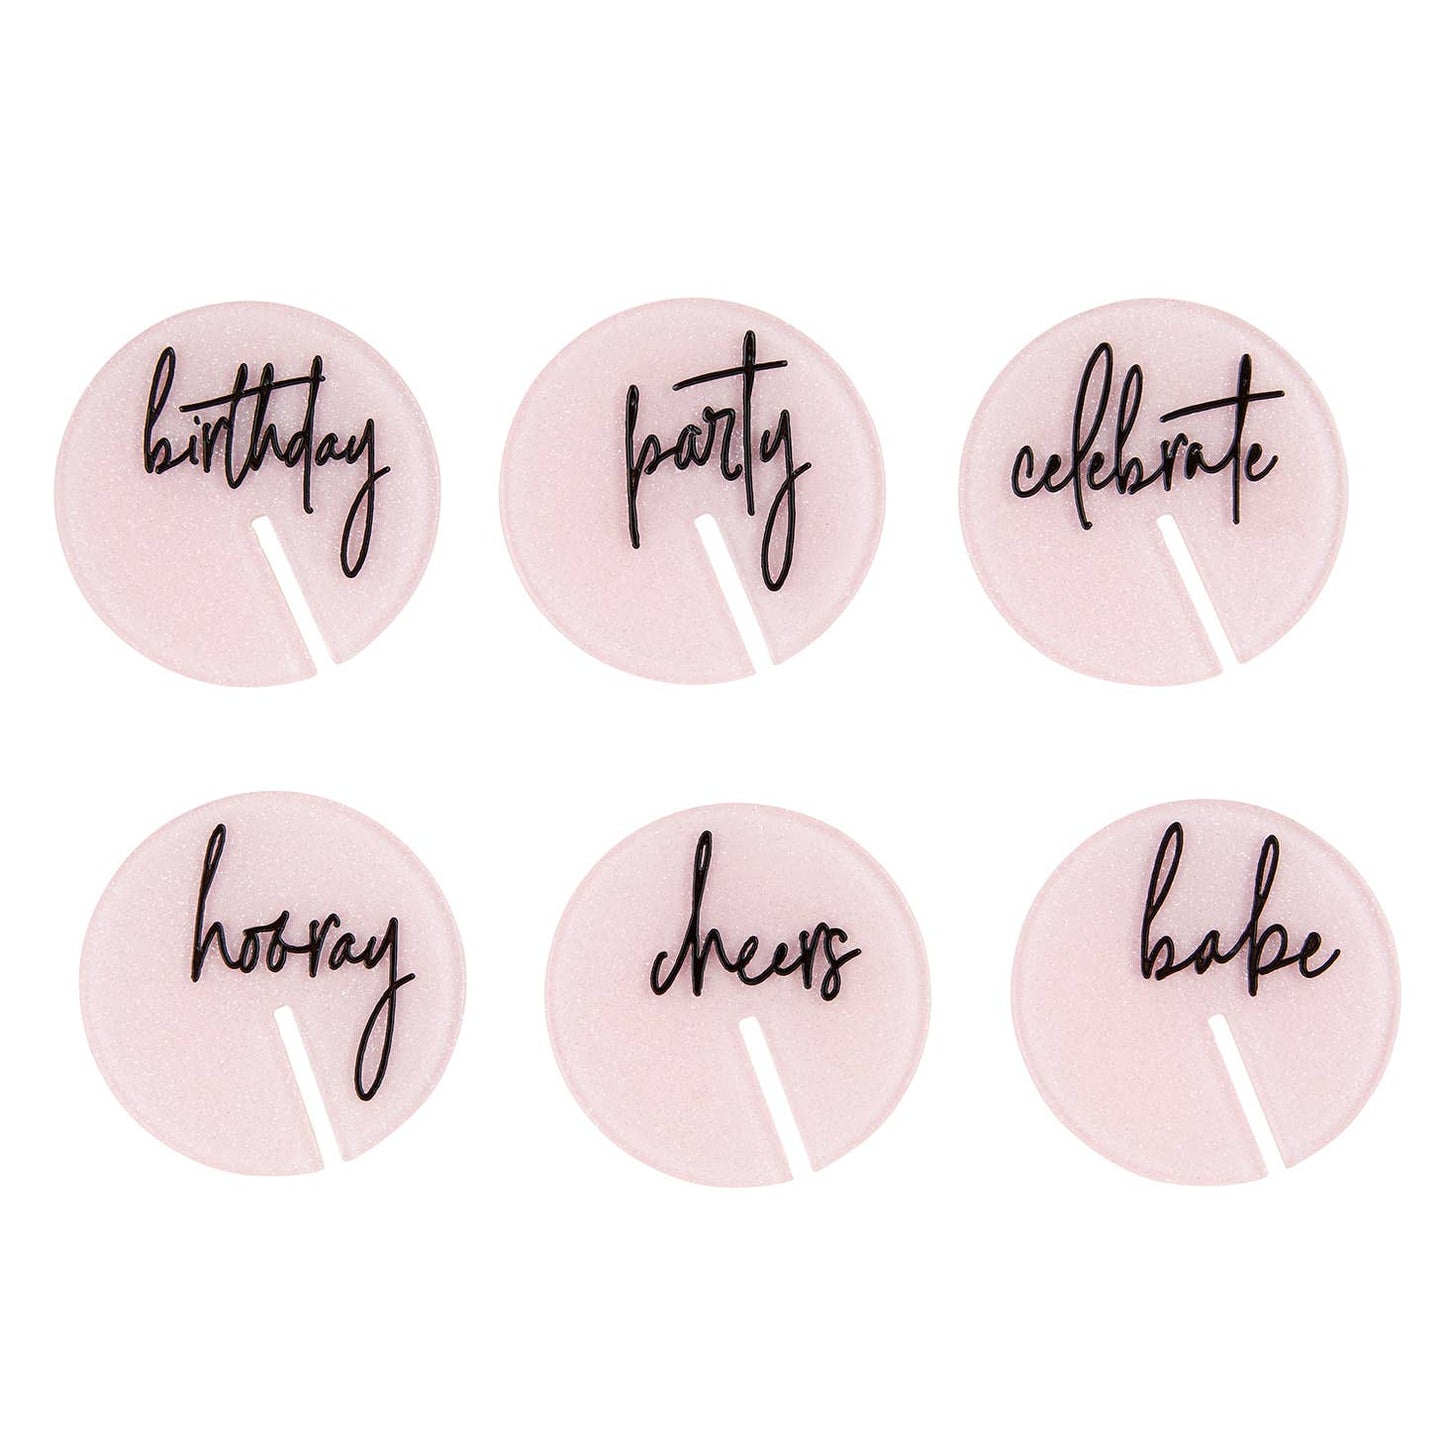 Acrylic Birthday Drink Markers - Favorite Little Things Co